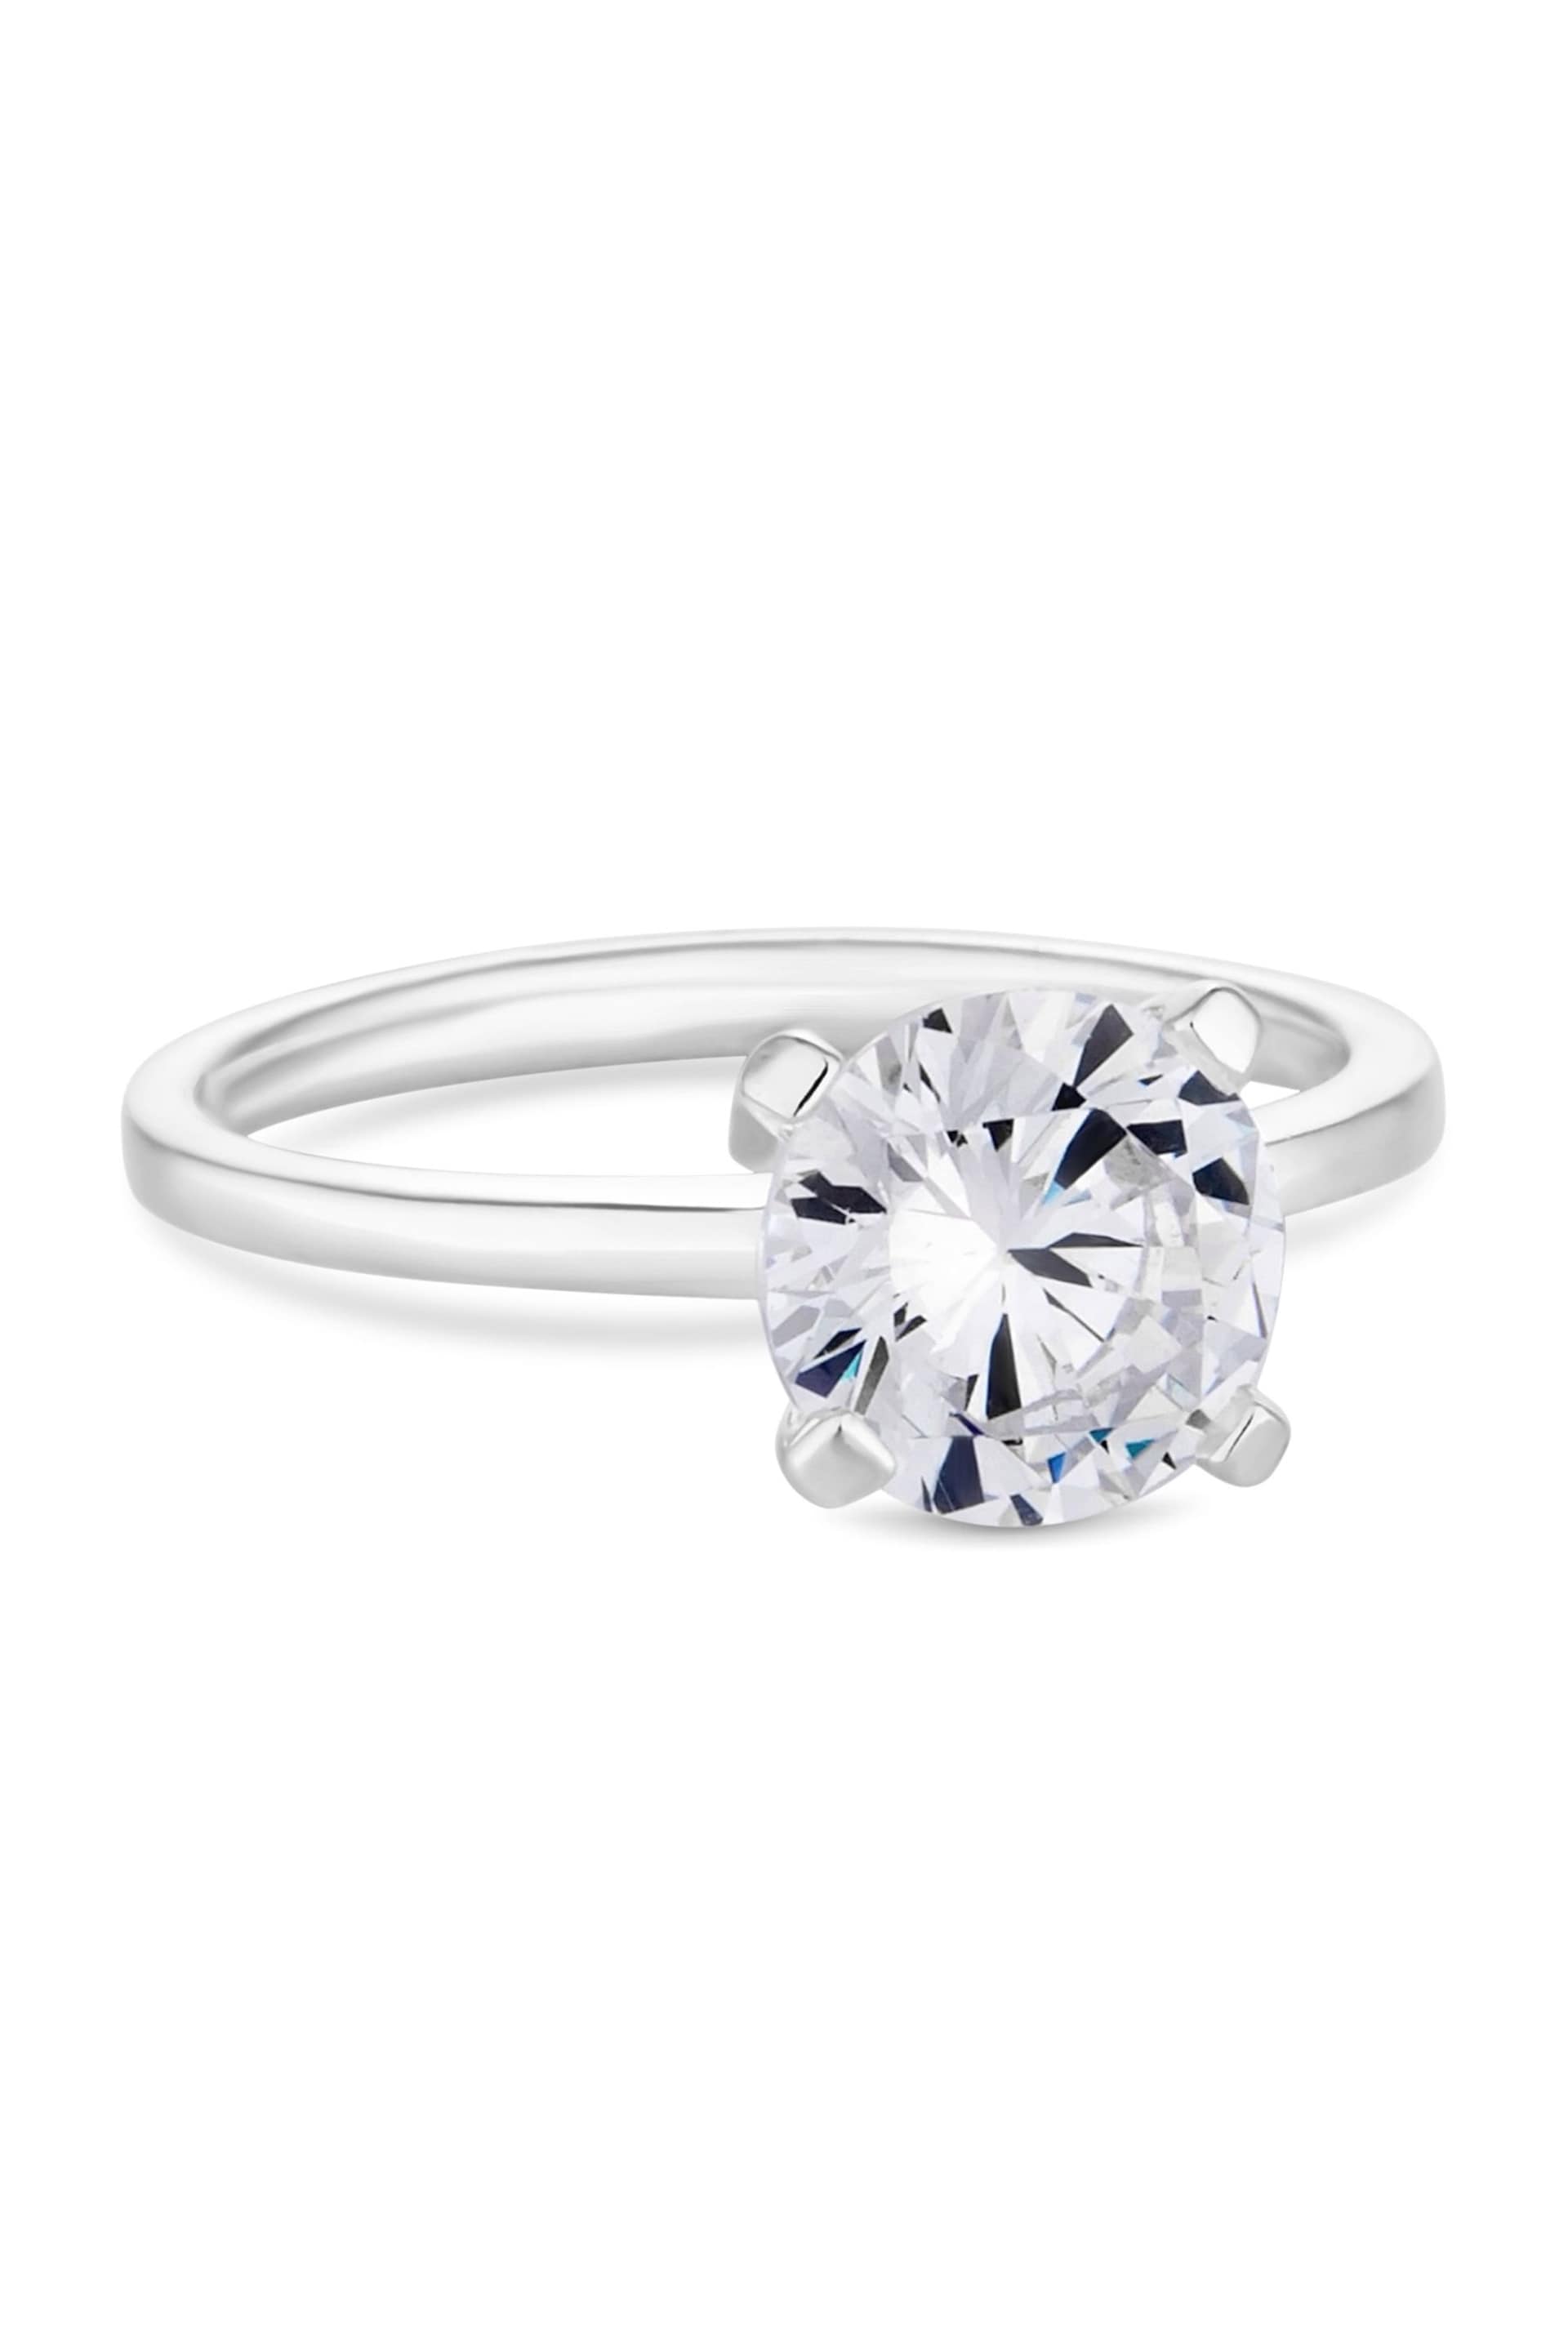 Simply Silver Silver Tone Sterling925 with Cubic Zirconia Solitaire Ring - Image 1 of 2